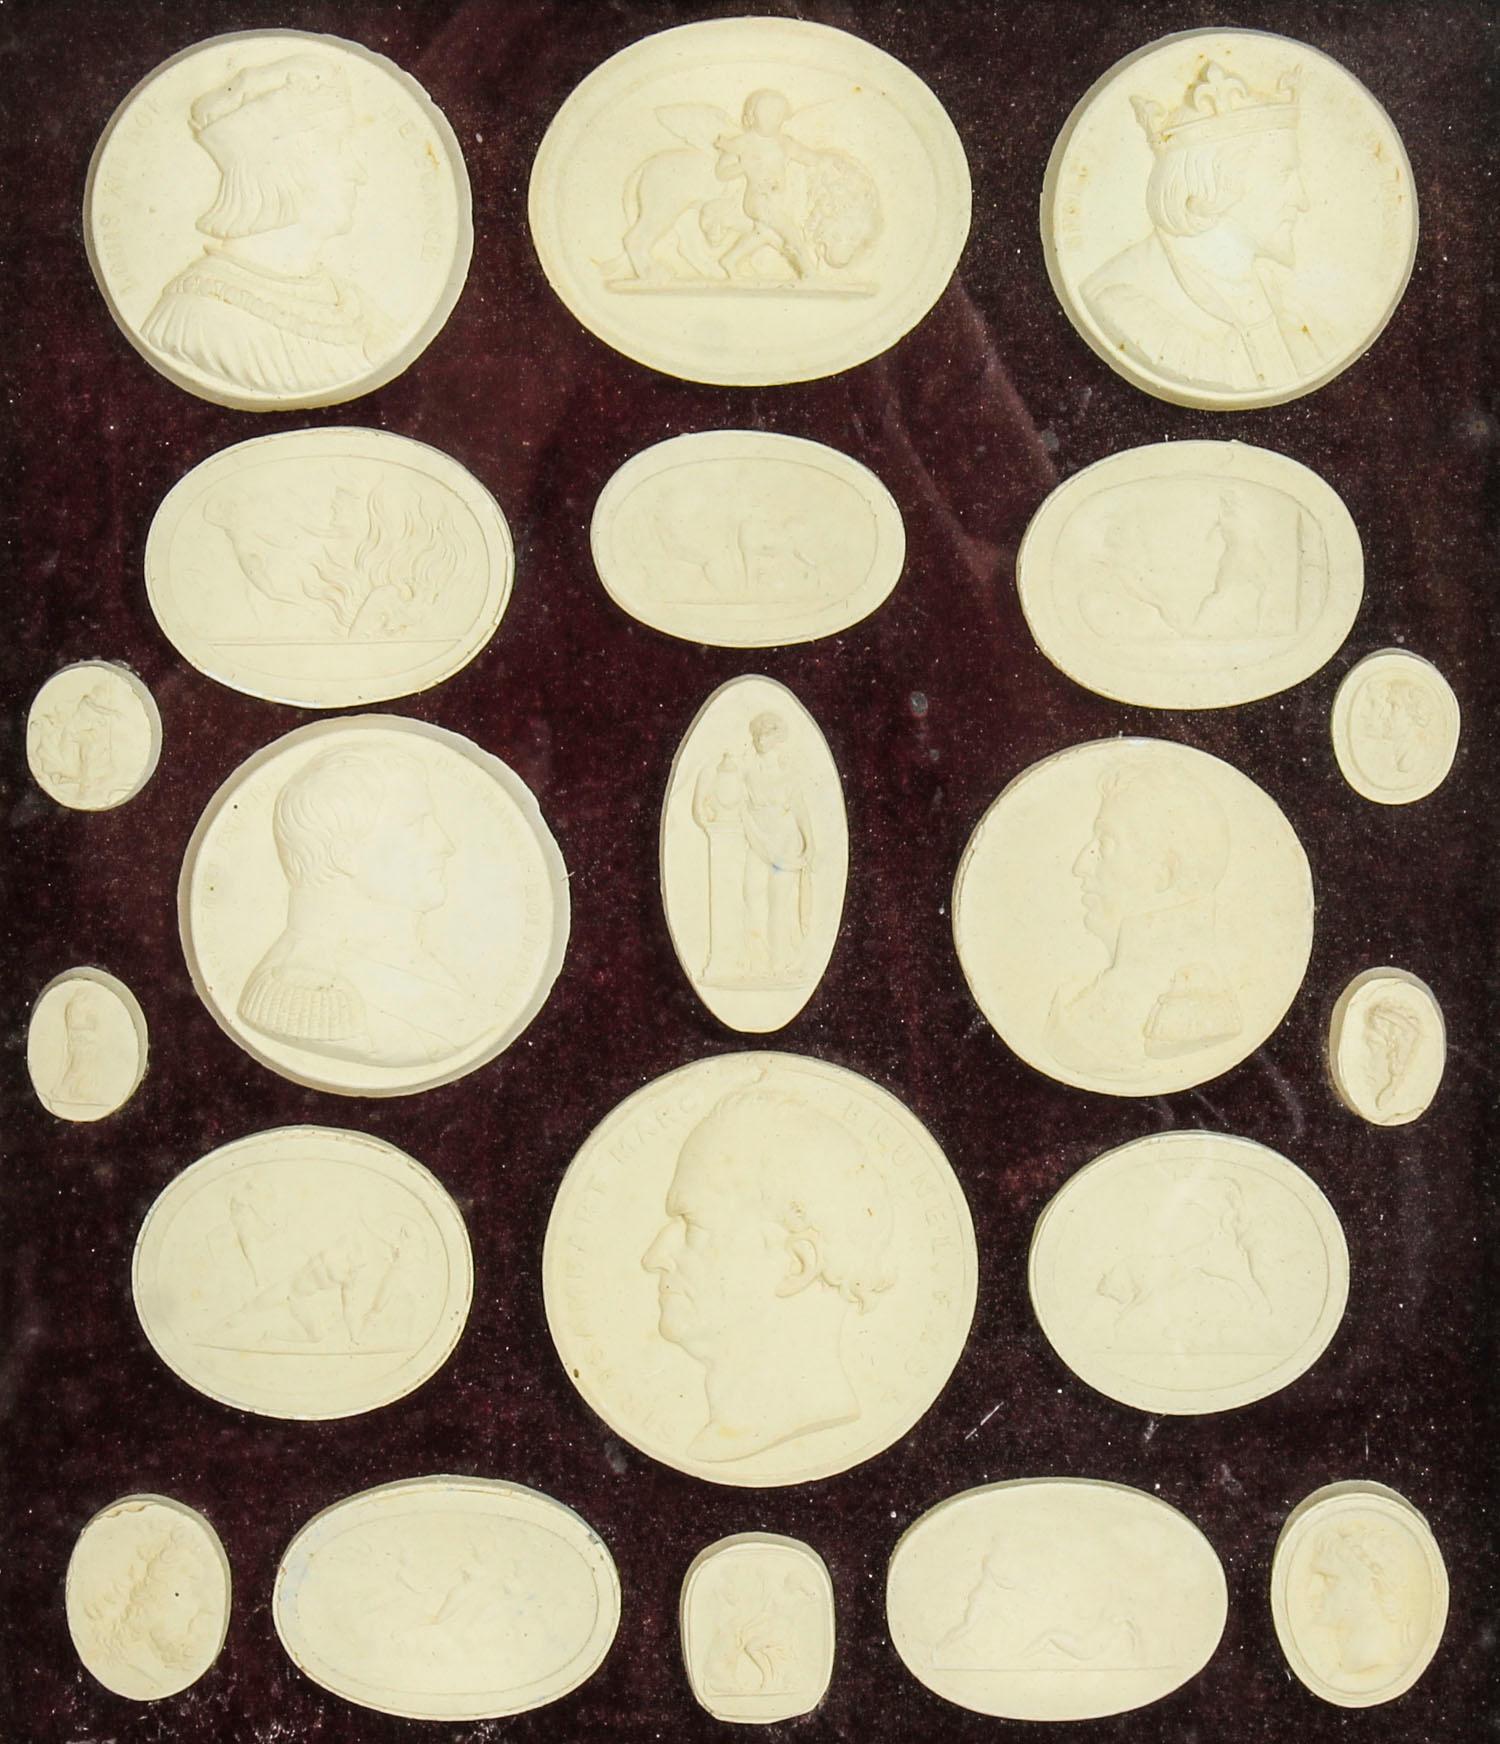 This is a truly magnificent decorative arrangement of twenty-one framed plaster intaglios of various antique subjects, circa 1840 in date.
 
These splendid intaglios are beautifully mounted on the original purple velvet ground and set in the